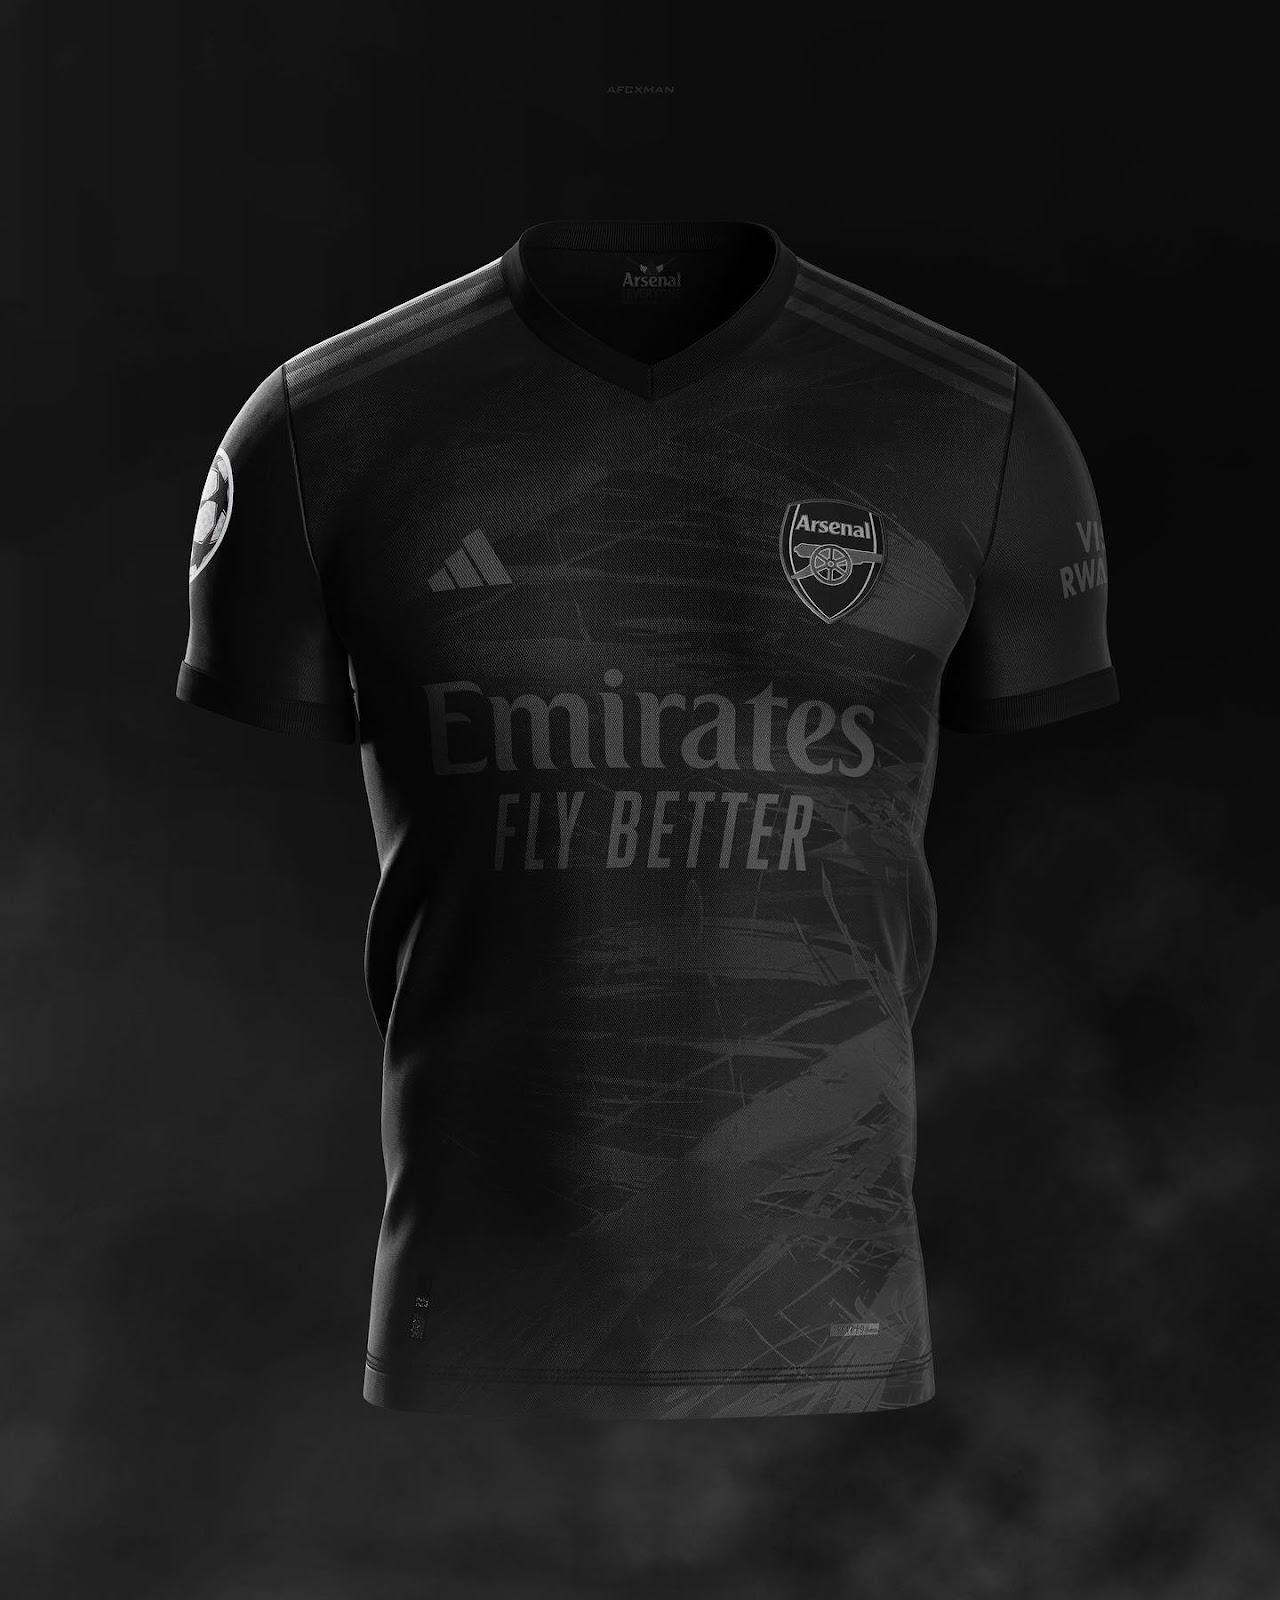 Arsenal Away Kit For 2022 23 Season 'leaked' Online With New Black 'stealth' Design Which Will Be First In Their History. The US Sun